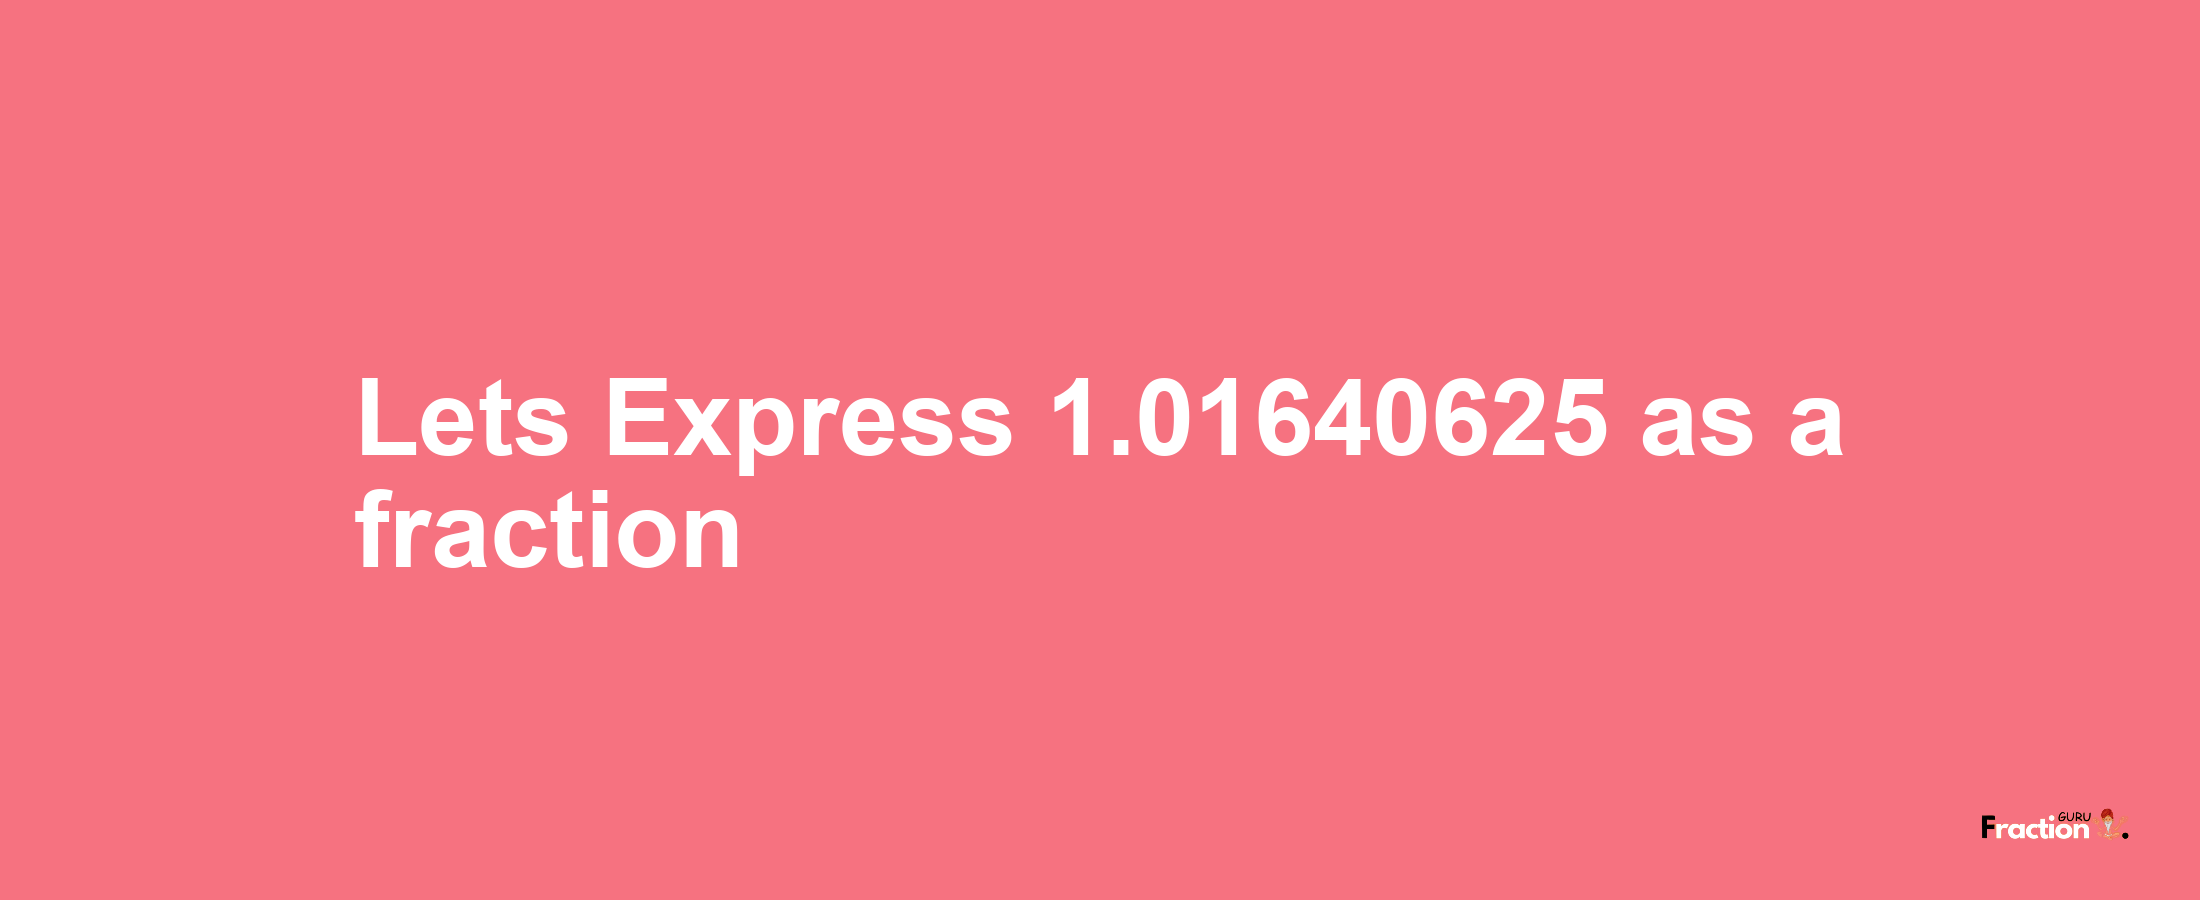 Lets Express 1.01640625 as afraction